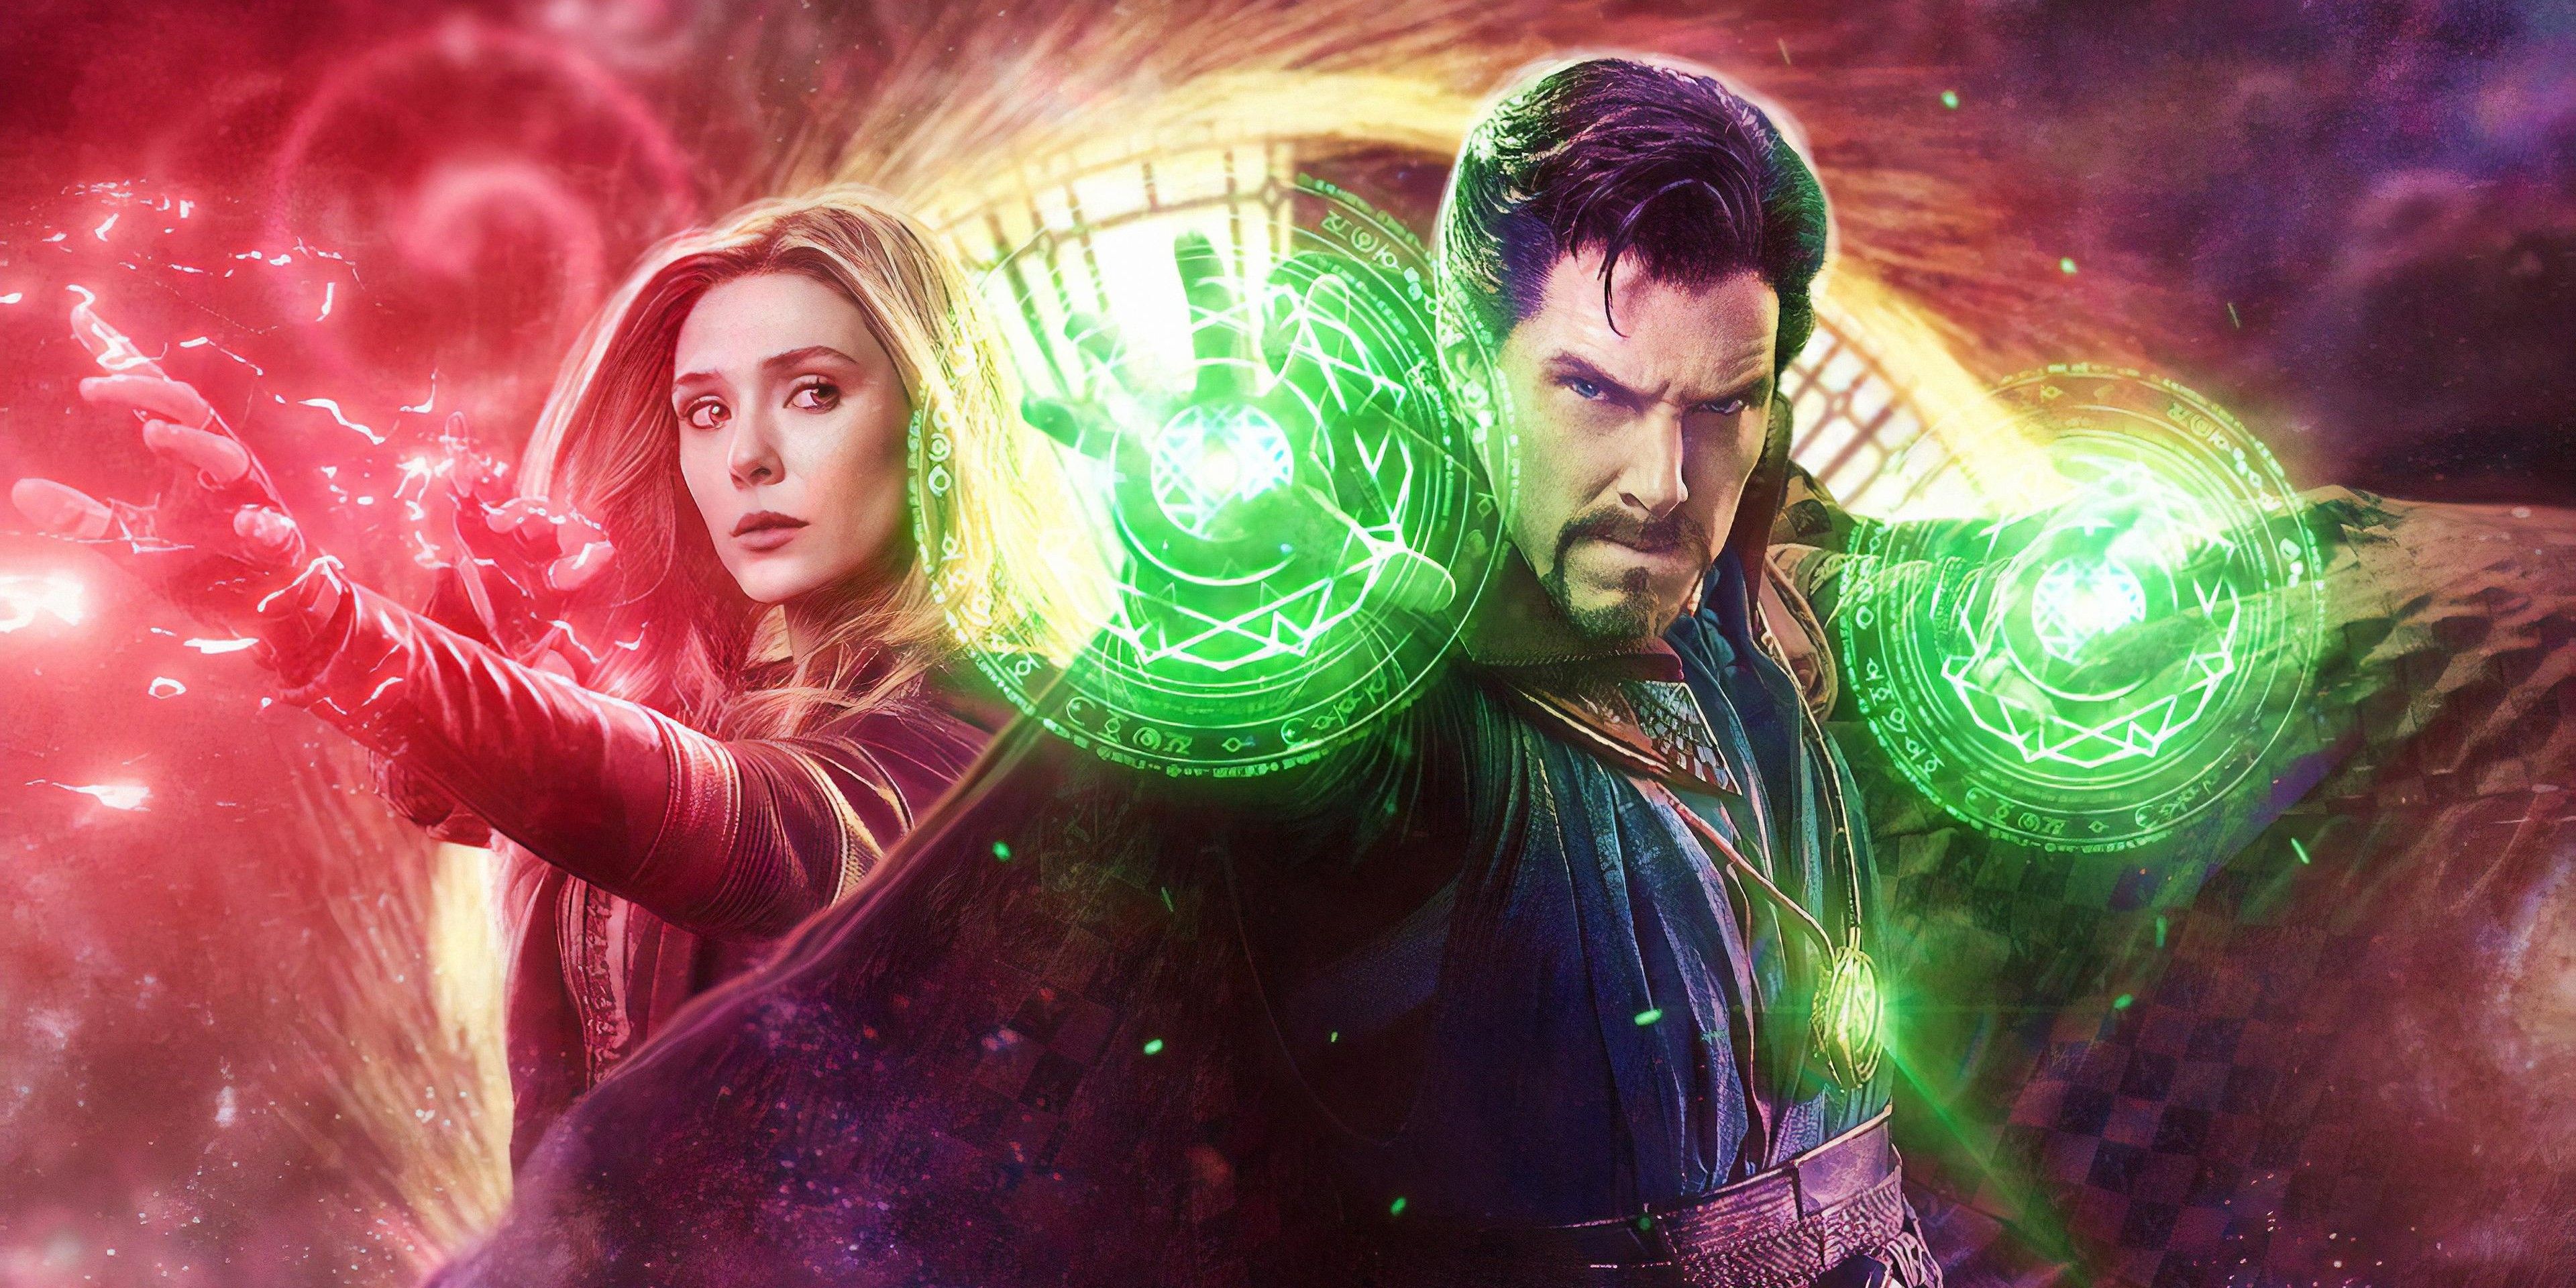 Blended image showing Wanda and Doctor Strange using their powers